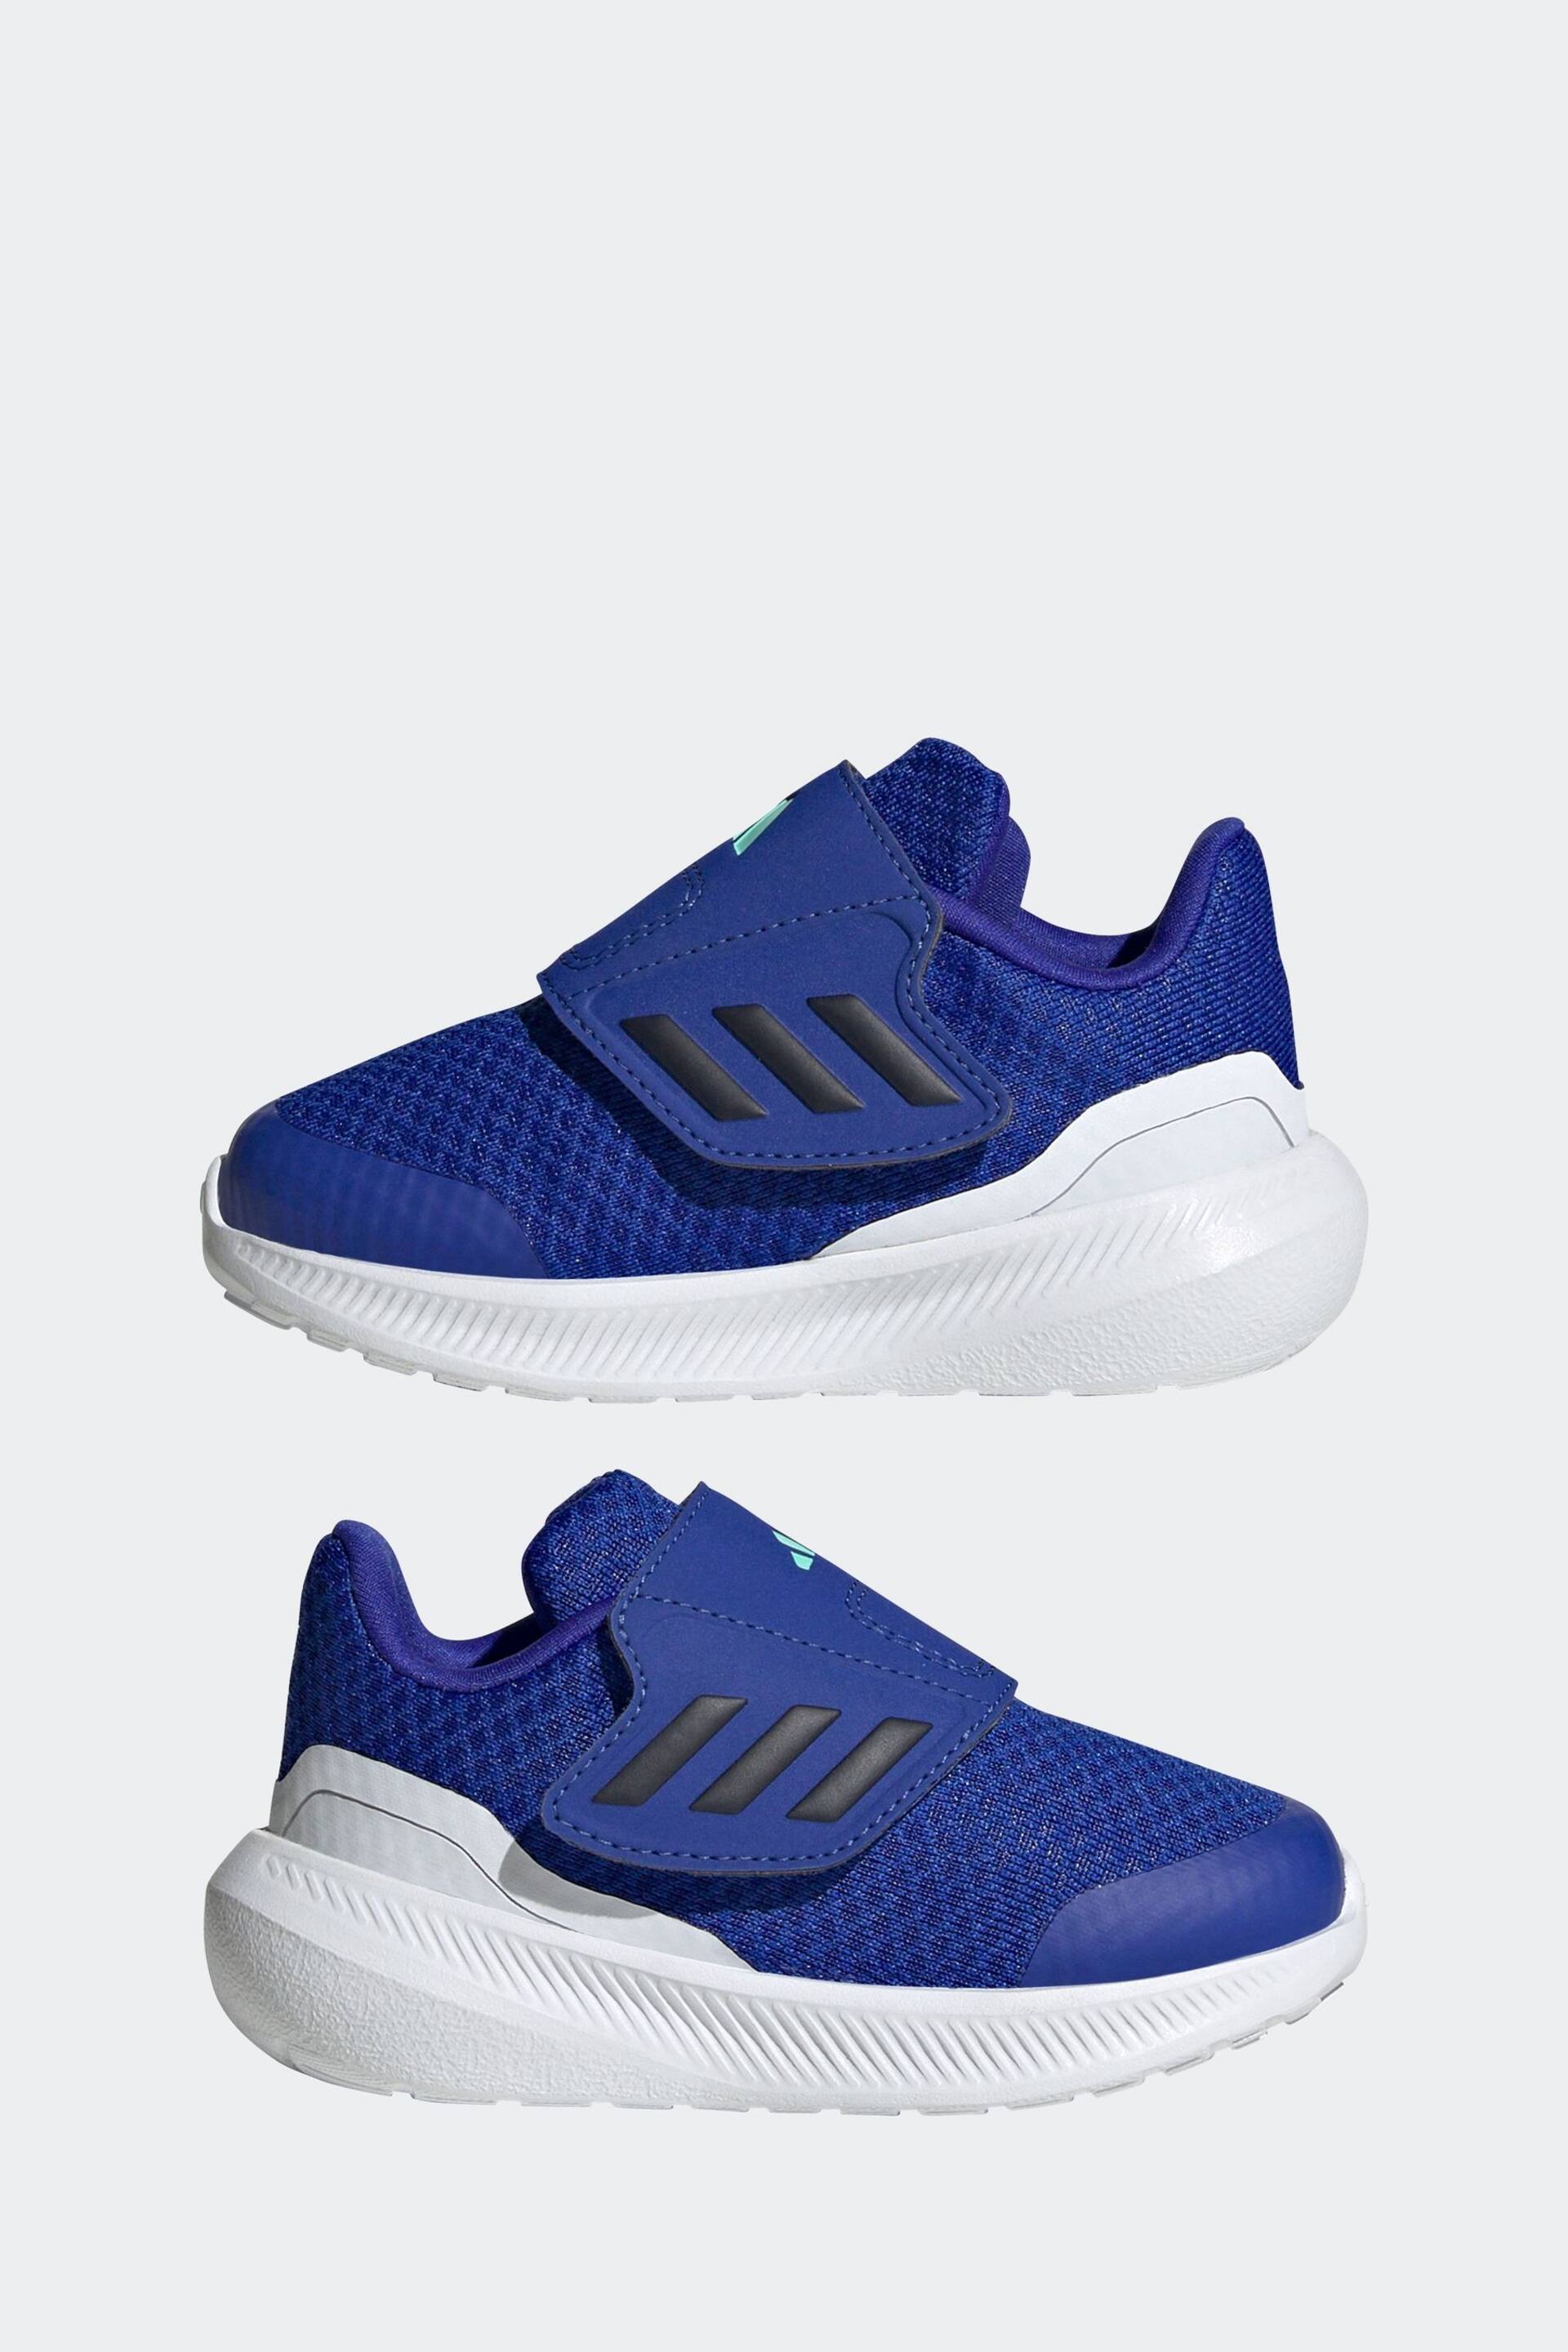 adidas Blue Sportswear Runfalcon 3.0 Hook And Loop Trainers - Image 5 of 9